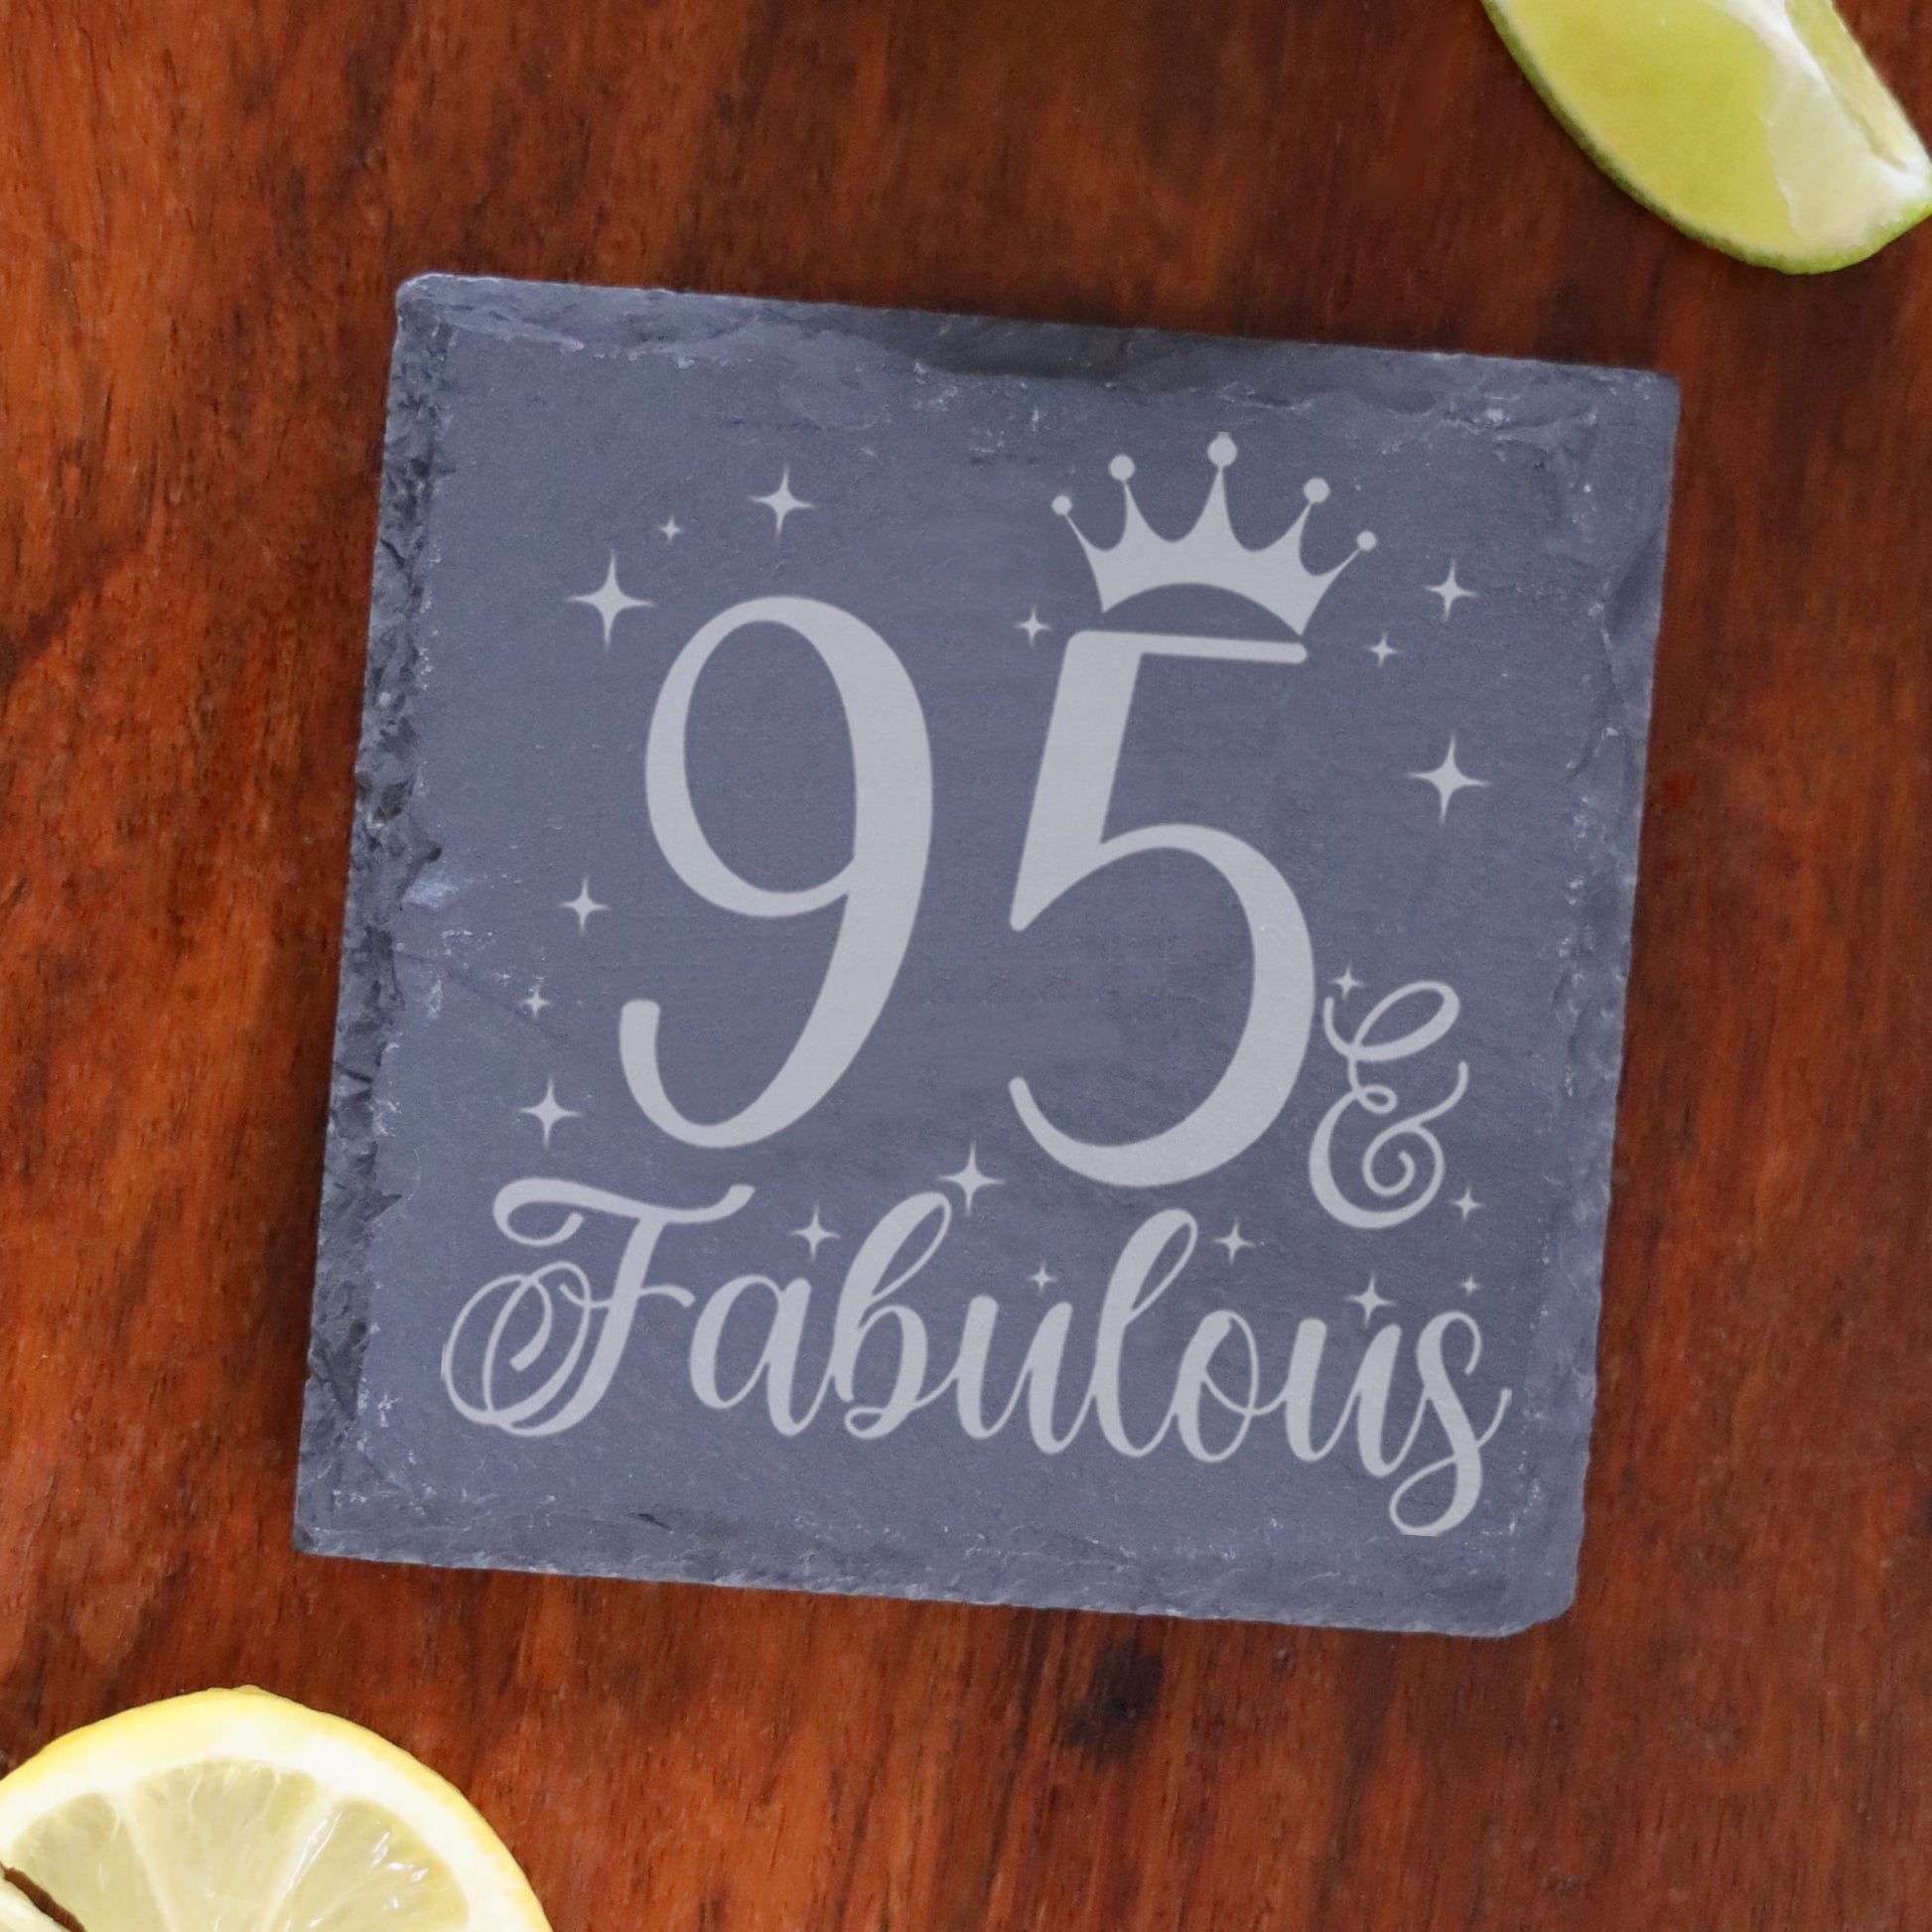 95 & Fabulous 95th Birthday Gift Engraved Wine Glass and/or Coaster Set  - Always Looking Good - Square Coaster Only  